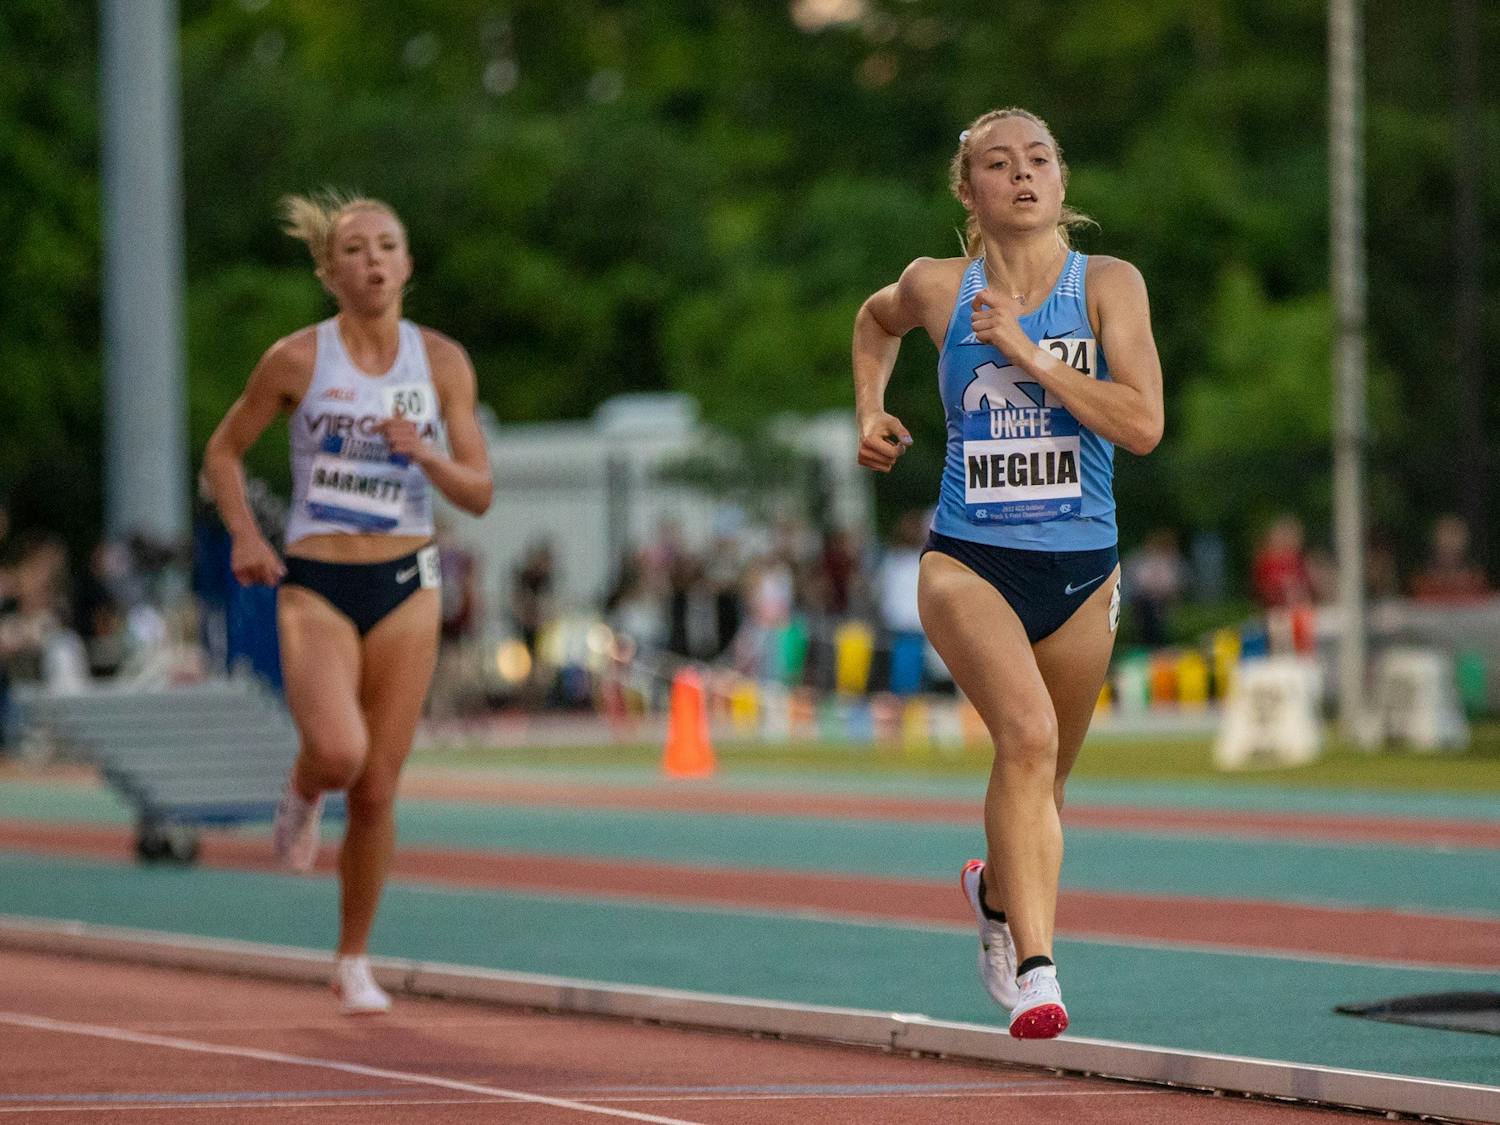 Sophomore Sasha Neglia crosses the finish line of the 5000M ACC Championship Final at Morris Williams Track on Saturday, May 14, 2022. The UNC women's team finished sixth in the meet overall.